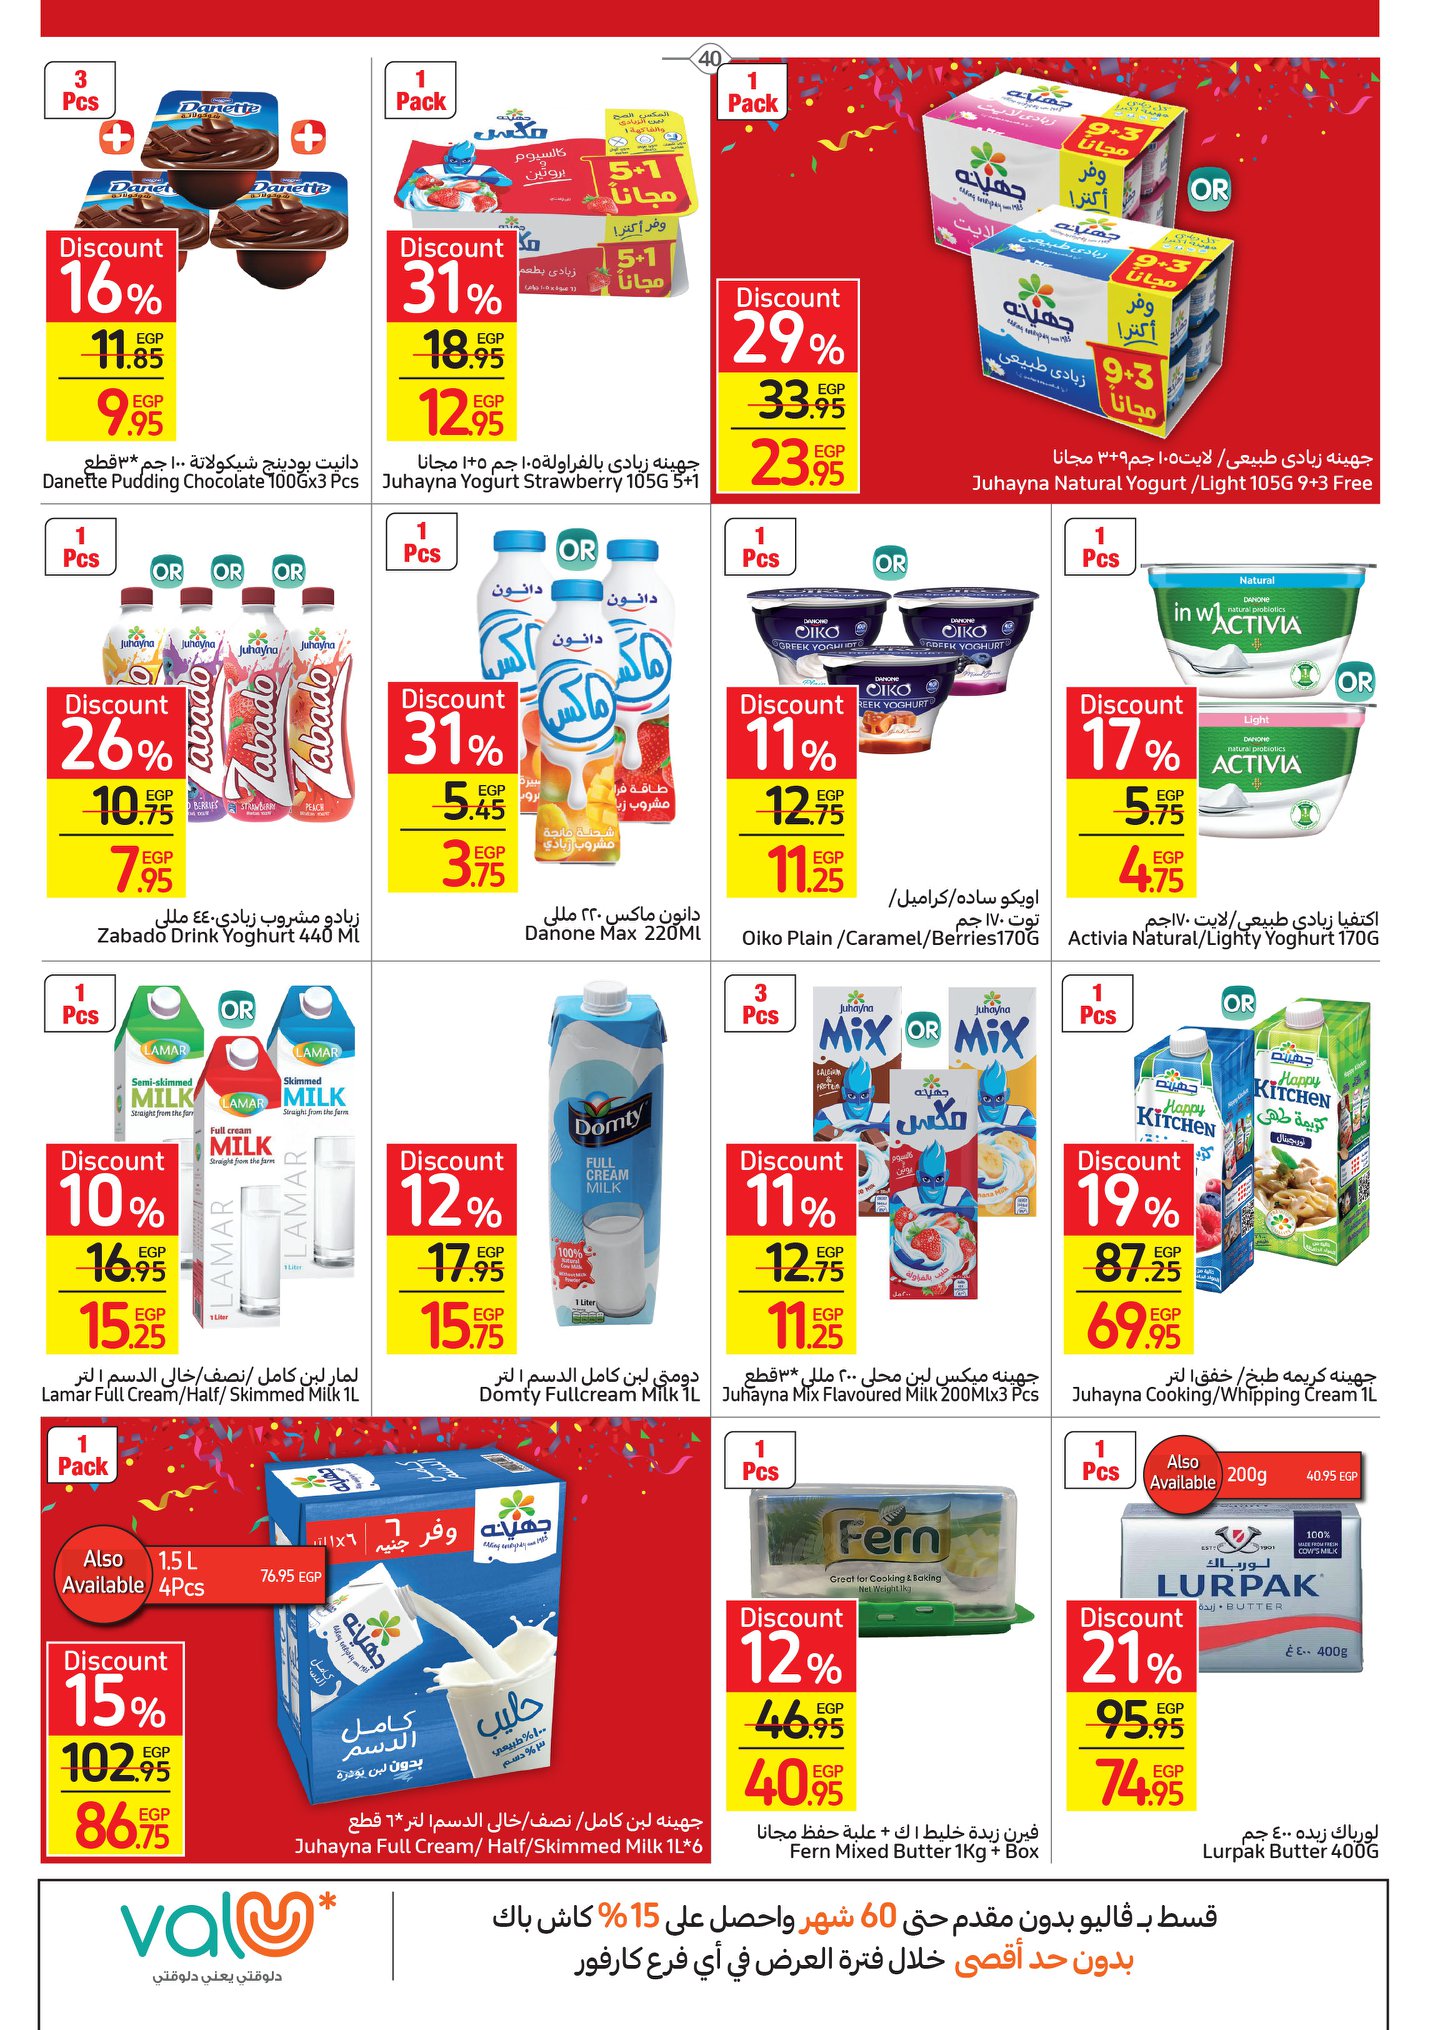 Carrefour magazine offers full 50% discounts and a surprise purchase in convenient installments without interest 46